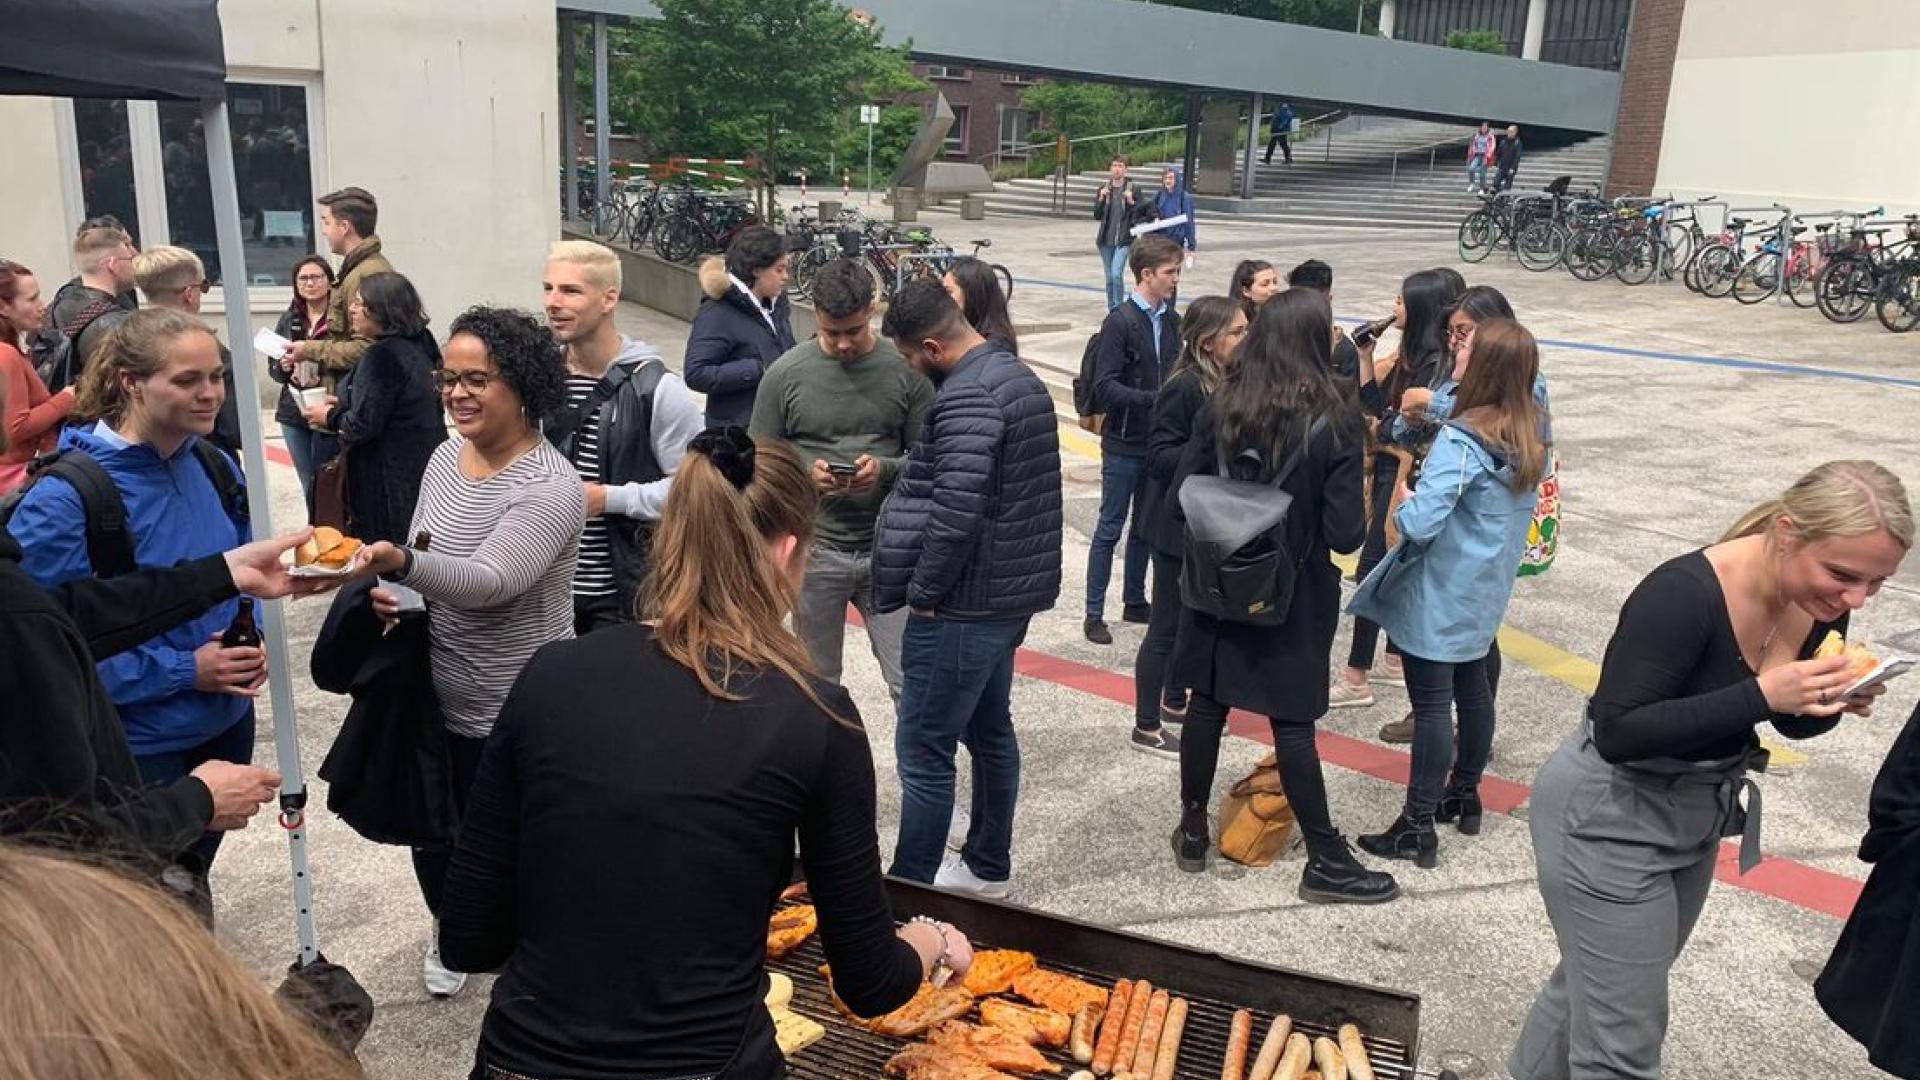 Welcome BBQ at HAW campus Bratwurst in Germany 2019 